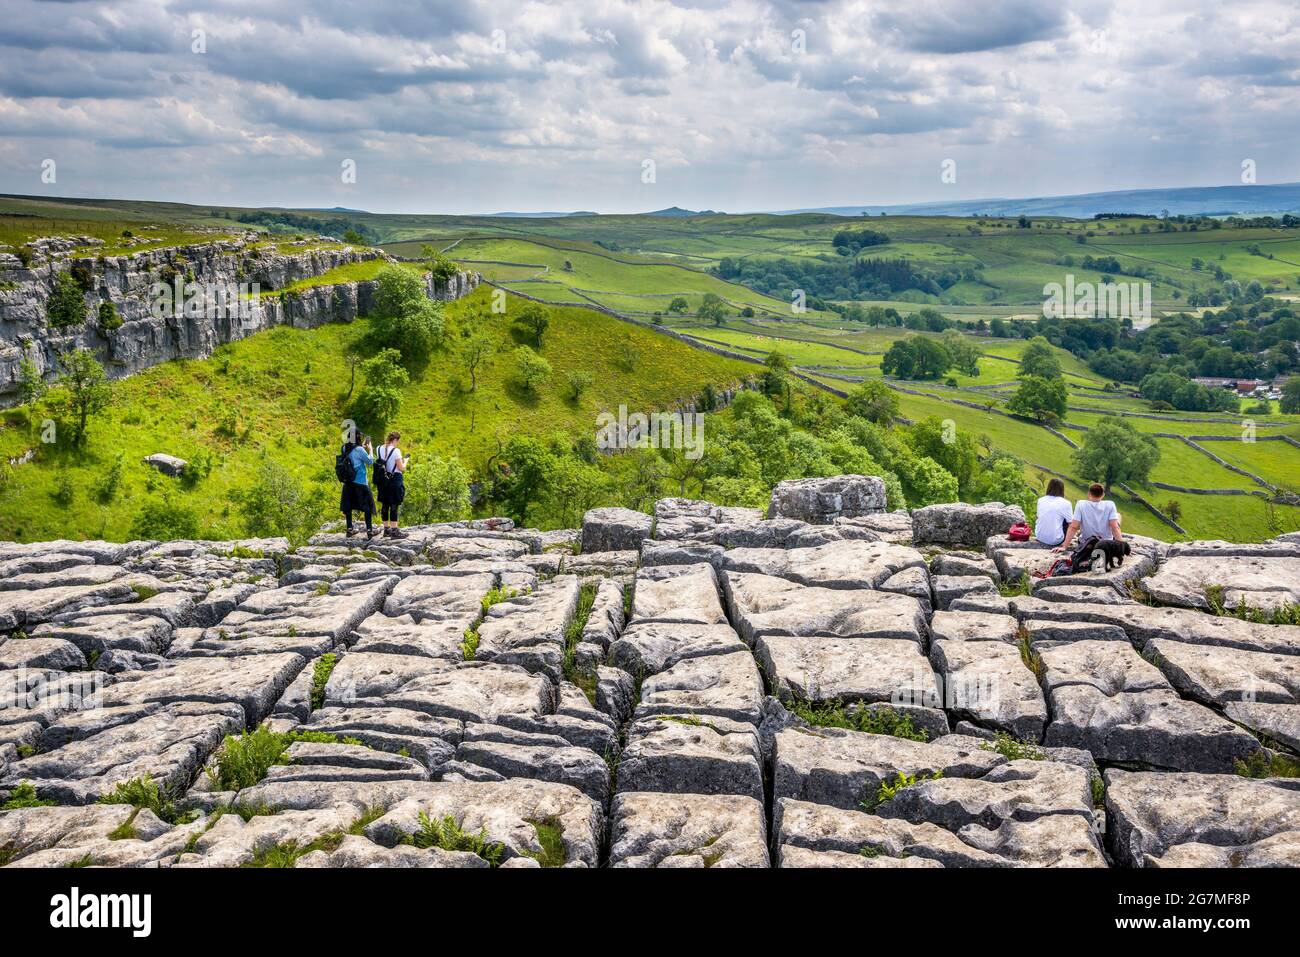 Malham Cove near the village of Malham, Wharfedale, Yorkshire Dales National Park, England, UK on a sunny summer's afternoon Stock Photo